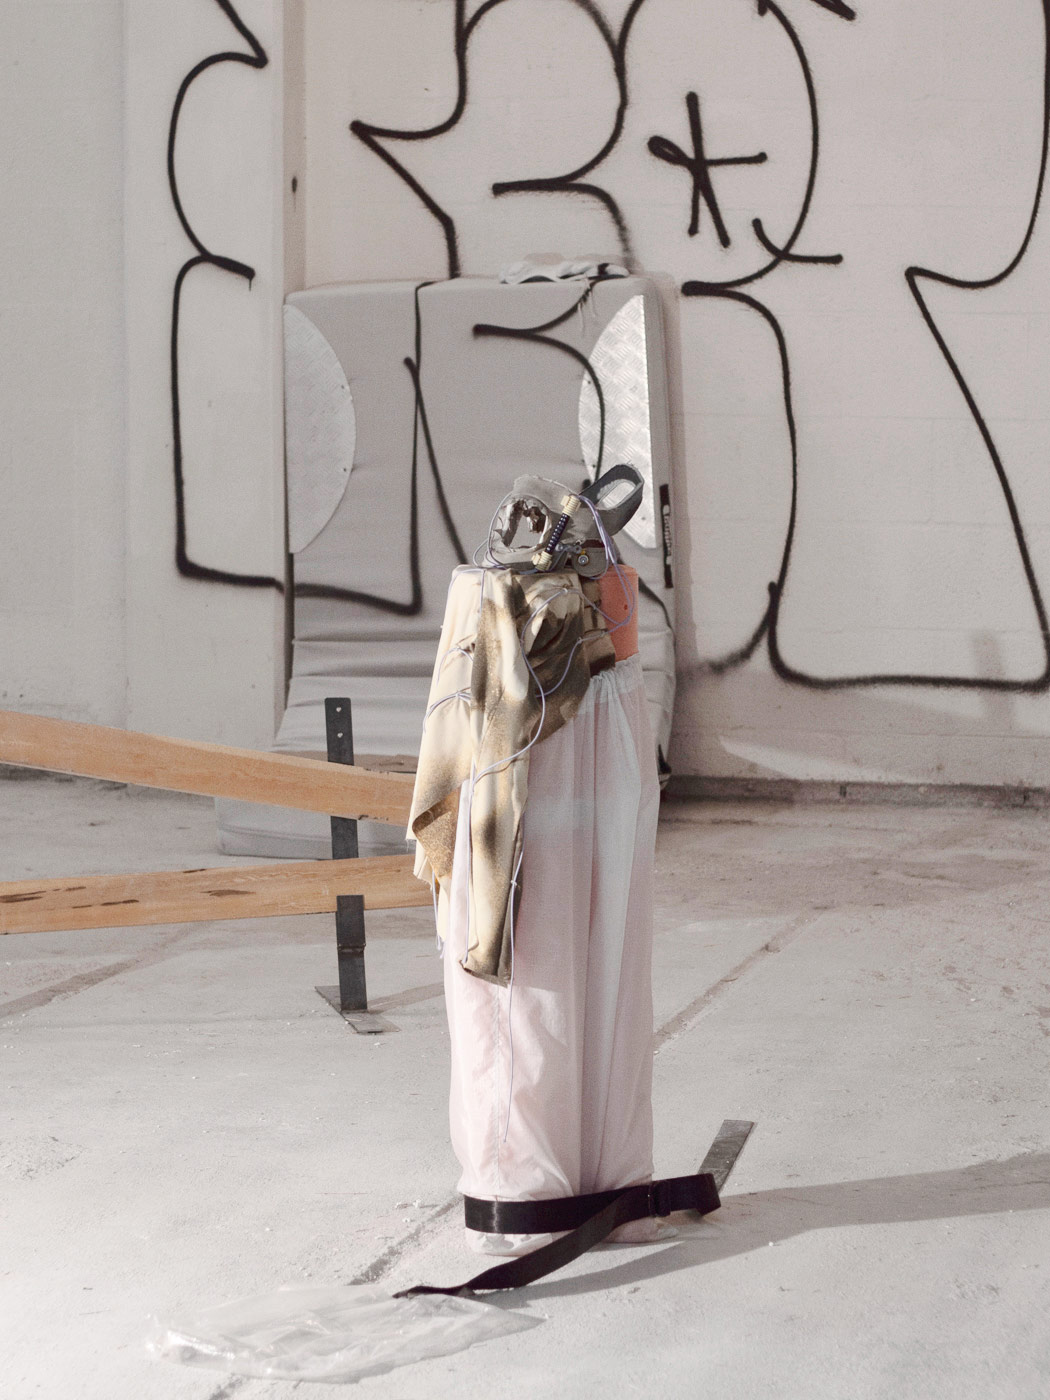 A neck guard on a fabric base. A textile torso hangs down from the base. A rudimentary barrier, a mattress leaning against the wall and graffiti can be seen in the background.